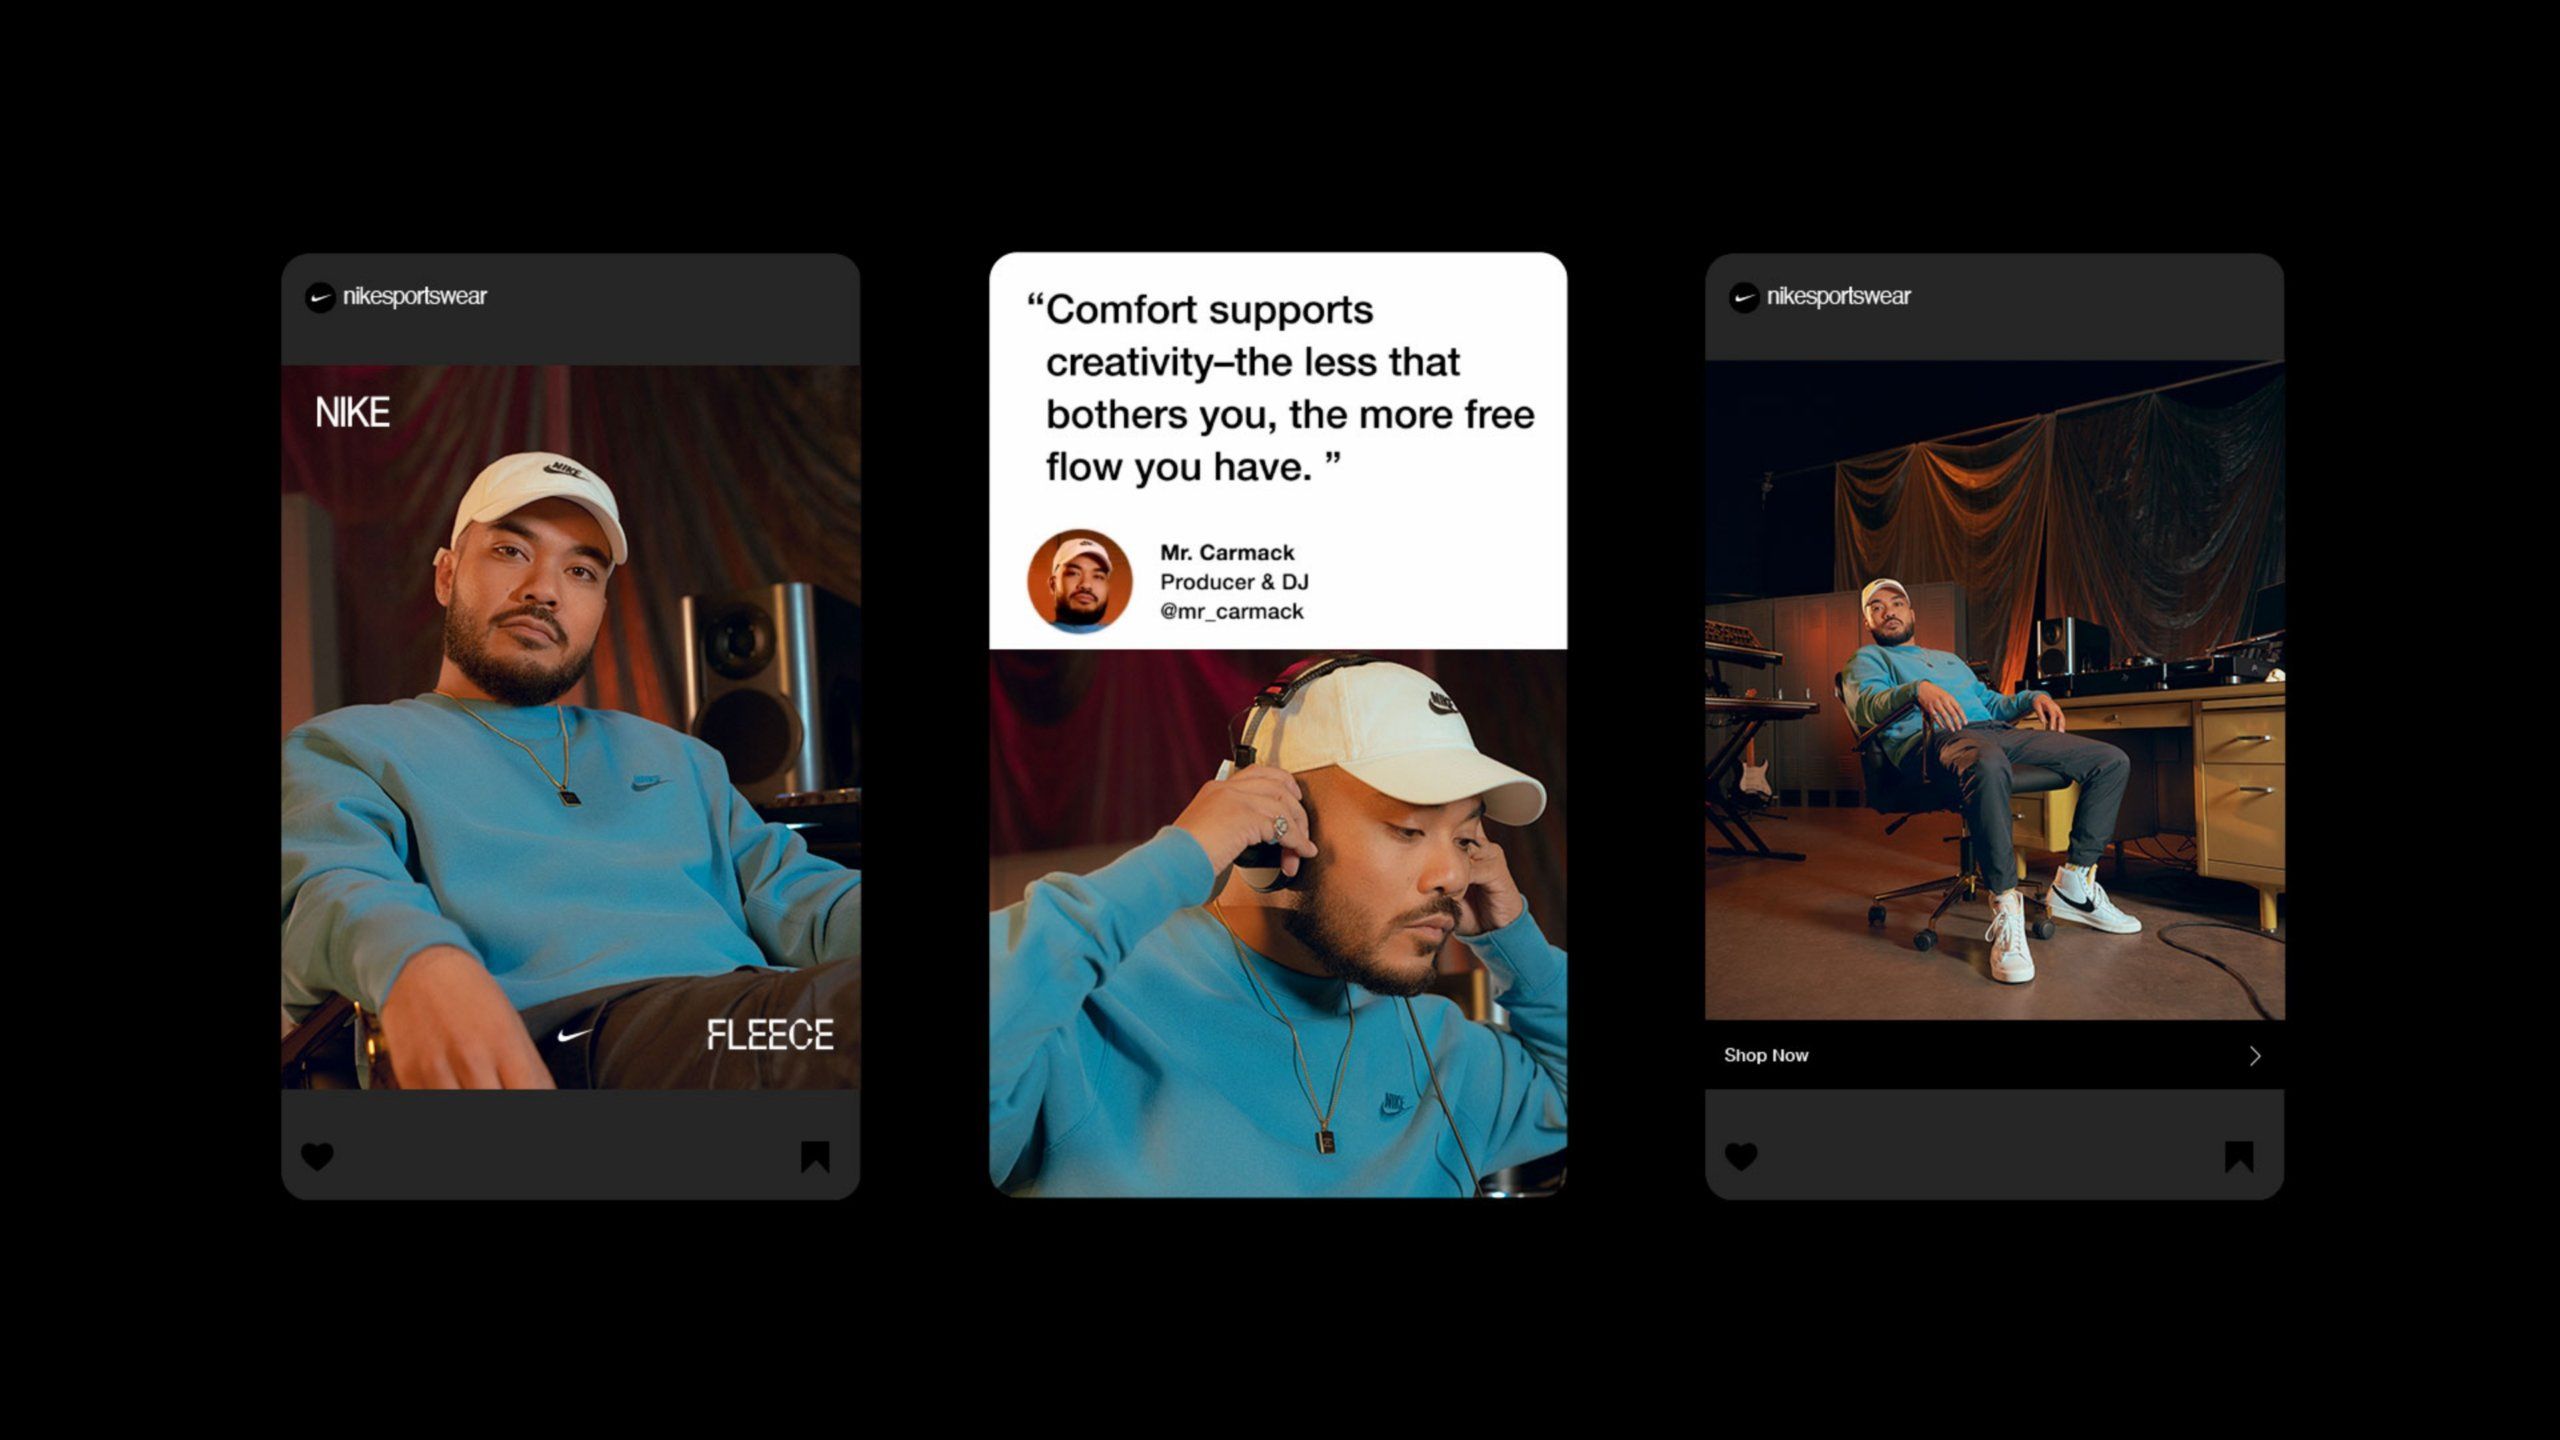 Three instagram posts from @nikesportswear featuring Mr. Carmack, Produce & DJ, wearing blue Nike Fleece sweatshirt in studio. "Comfort supports creativity- the less that bothers you, the more free flow you have"